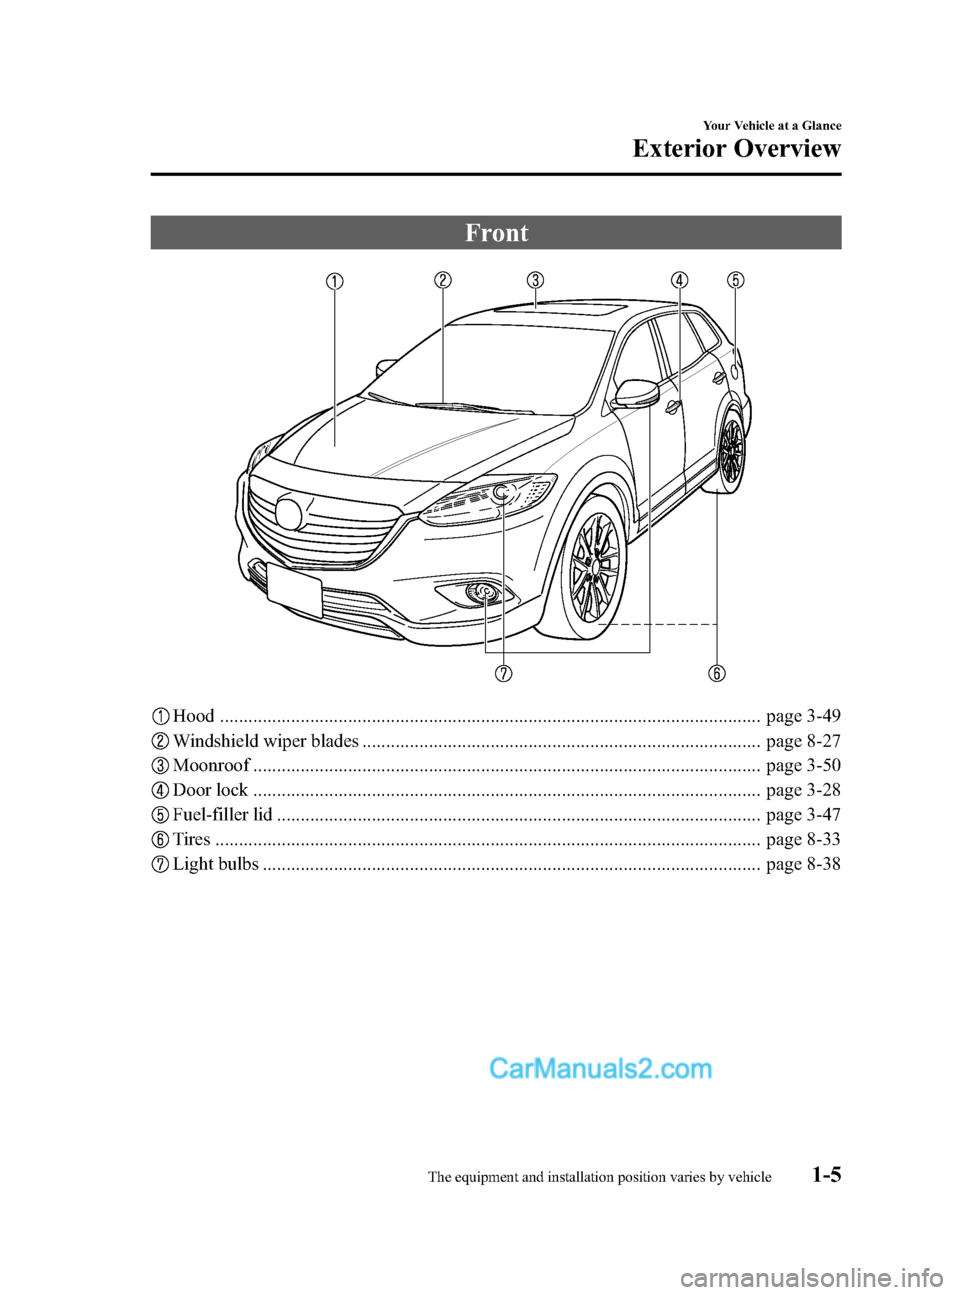 MAZDA MODEL CX-9 2015   (in English) User Guide Black plate (11,1)
Front
Hood .................................................................................................................. page 3-49
Windshield wiper blades .....................